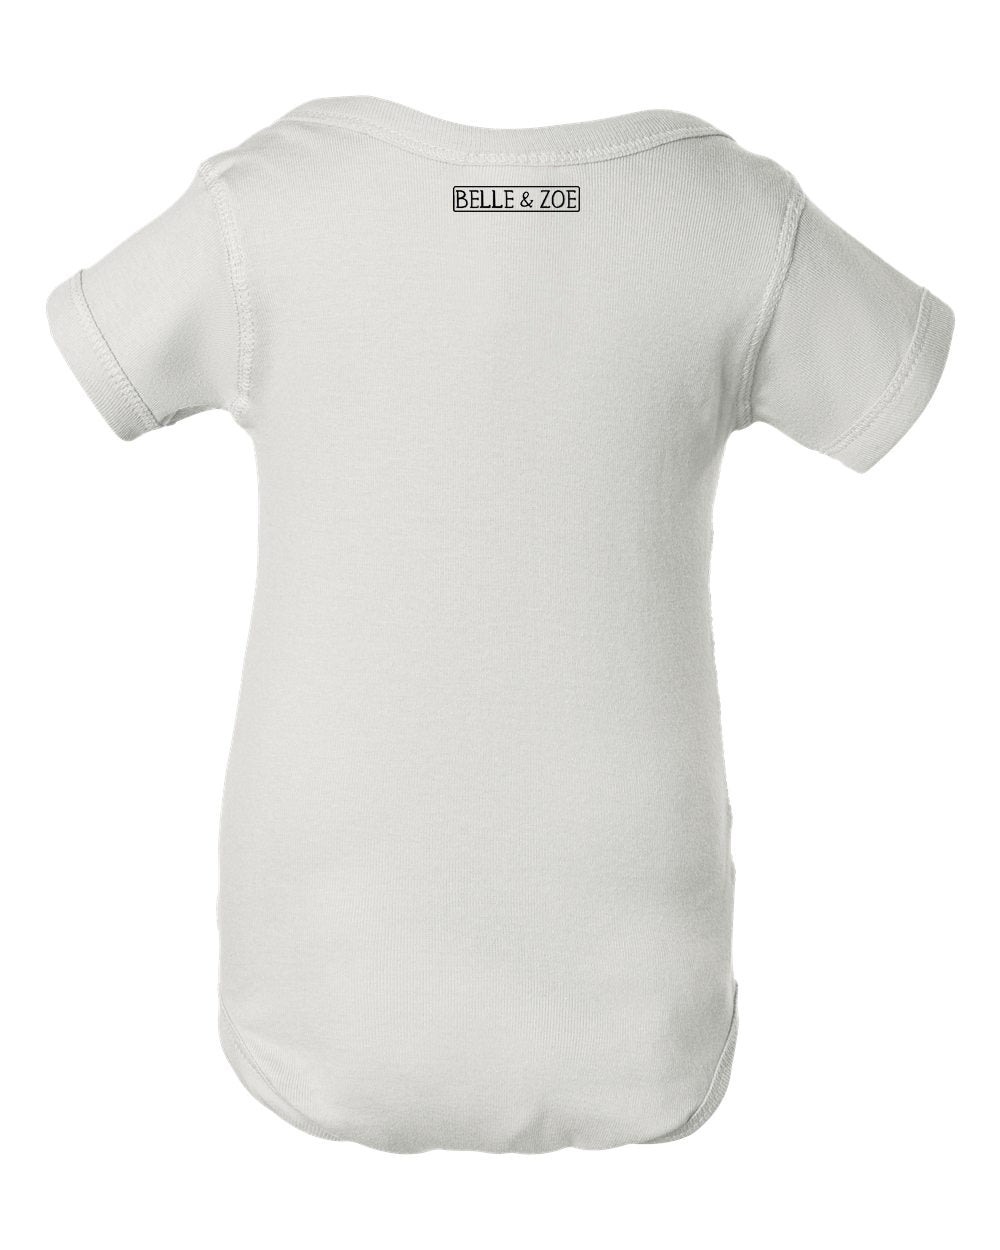 Belle & Zoe MAY DAY HULA INFANT Onesie